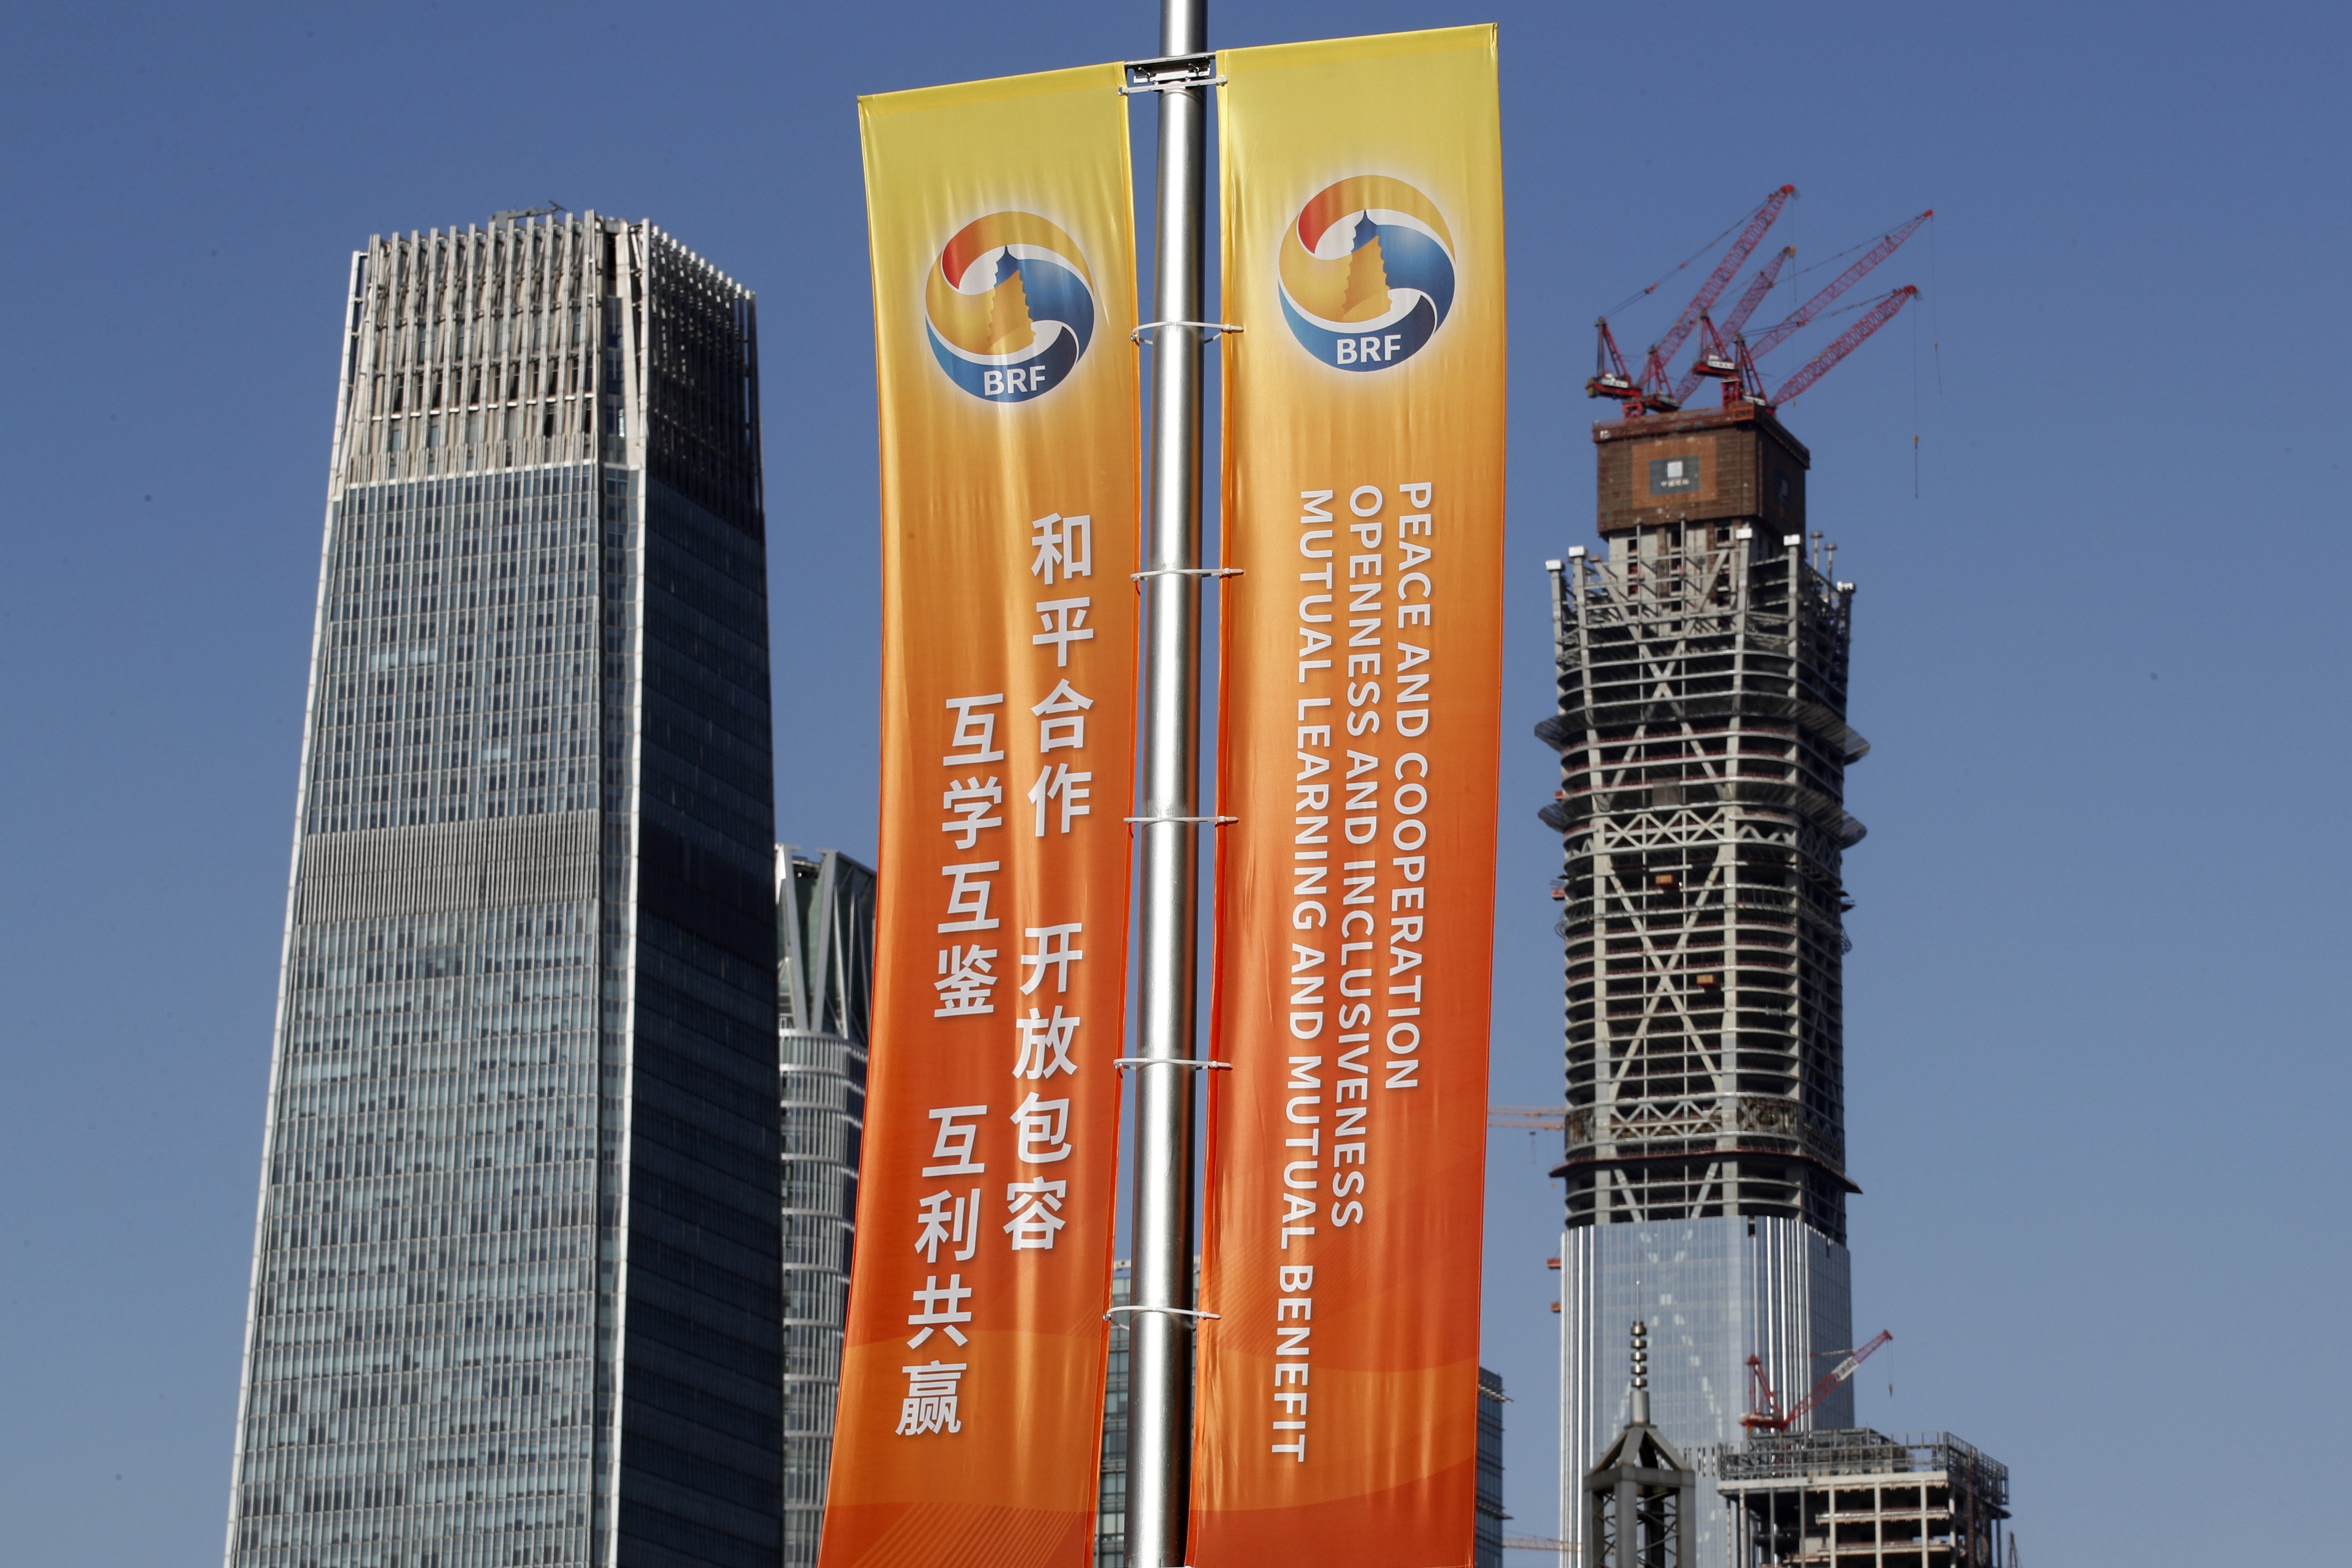 Banners announcing the belt and road forum in Beijing. Photo: AP